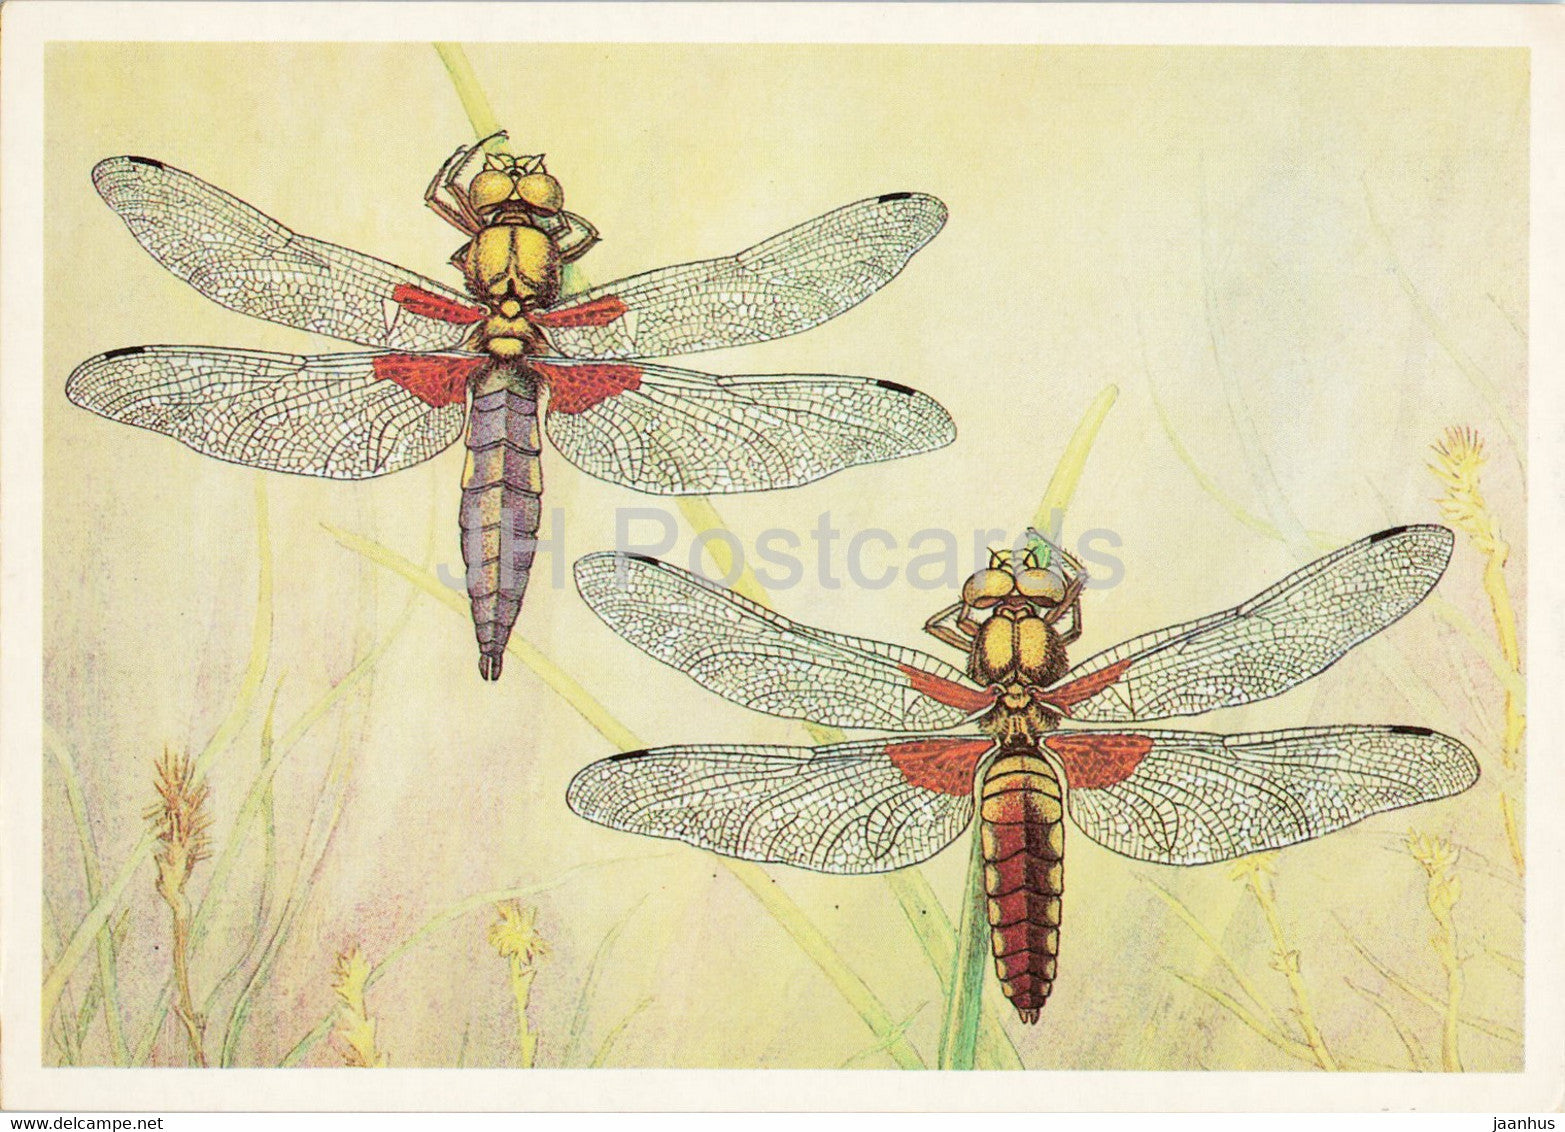 Libellula depressa - The broad-bodied chaser - dragonfly - Insects - illustration - 1987 - Russia USSR - unused - JH Postcards